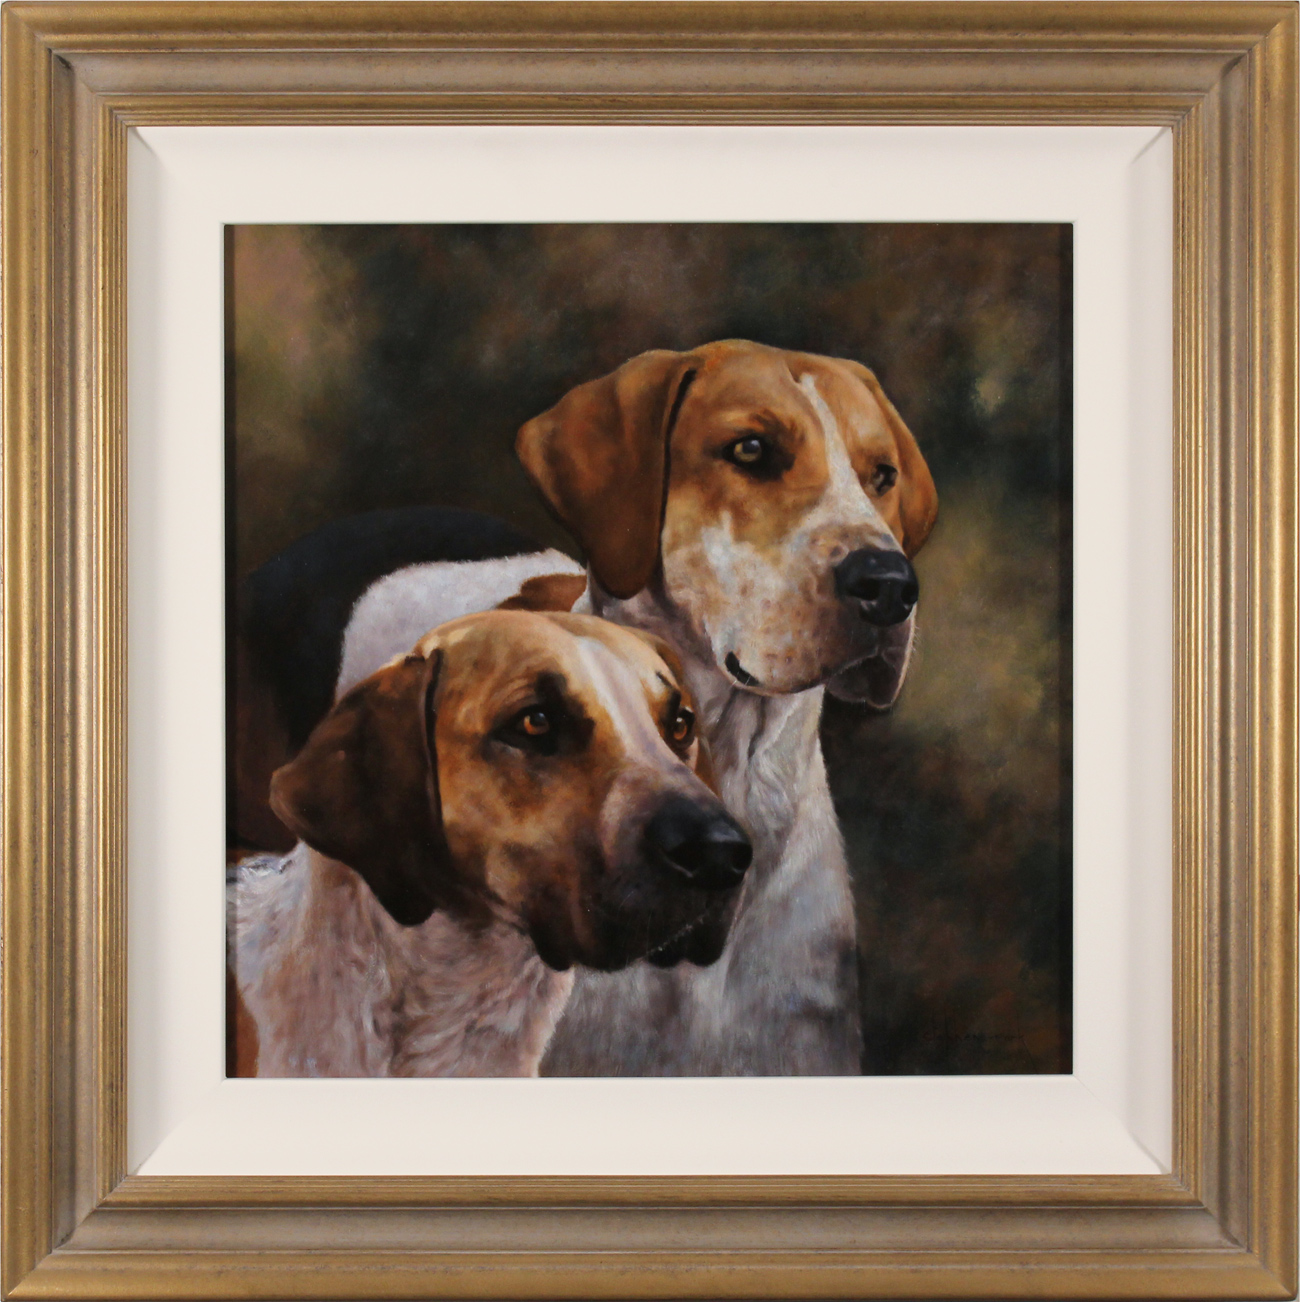 Stephen Park, Original oil painting on panel, Hounds. Click to enlarge